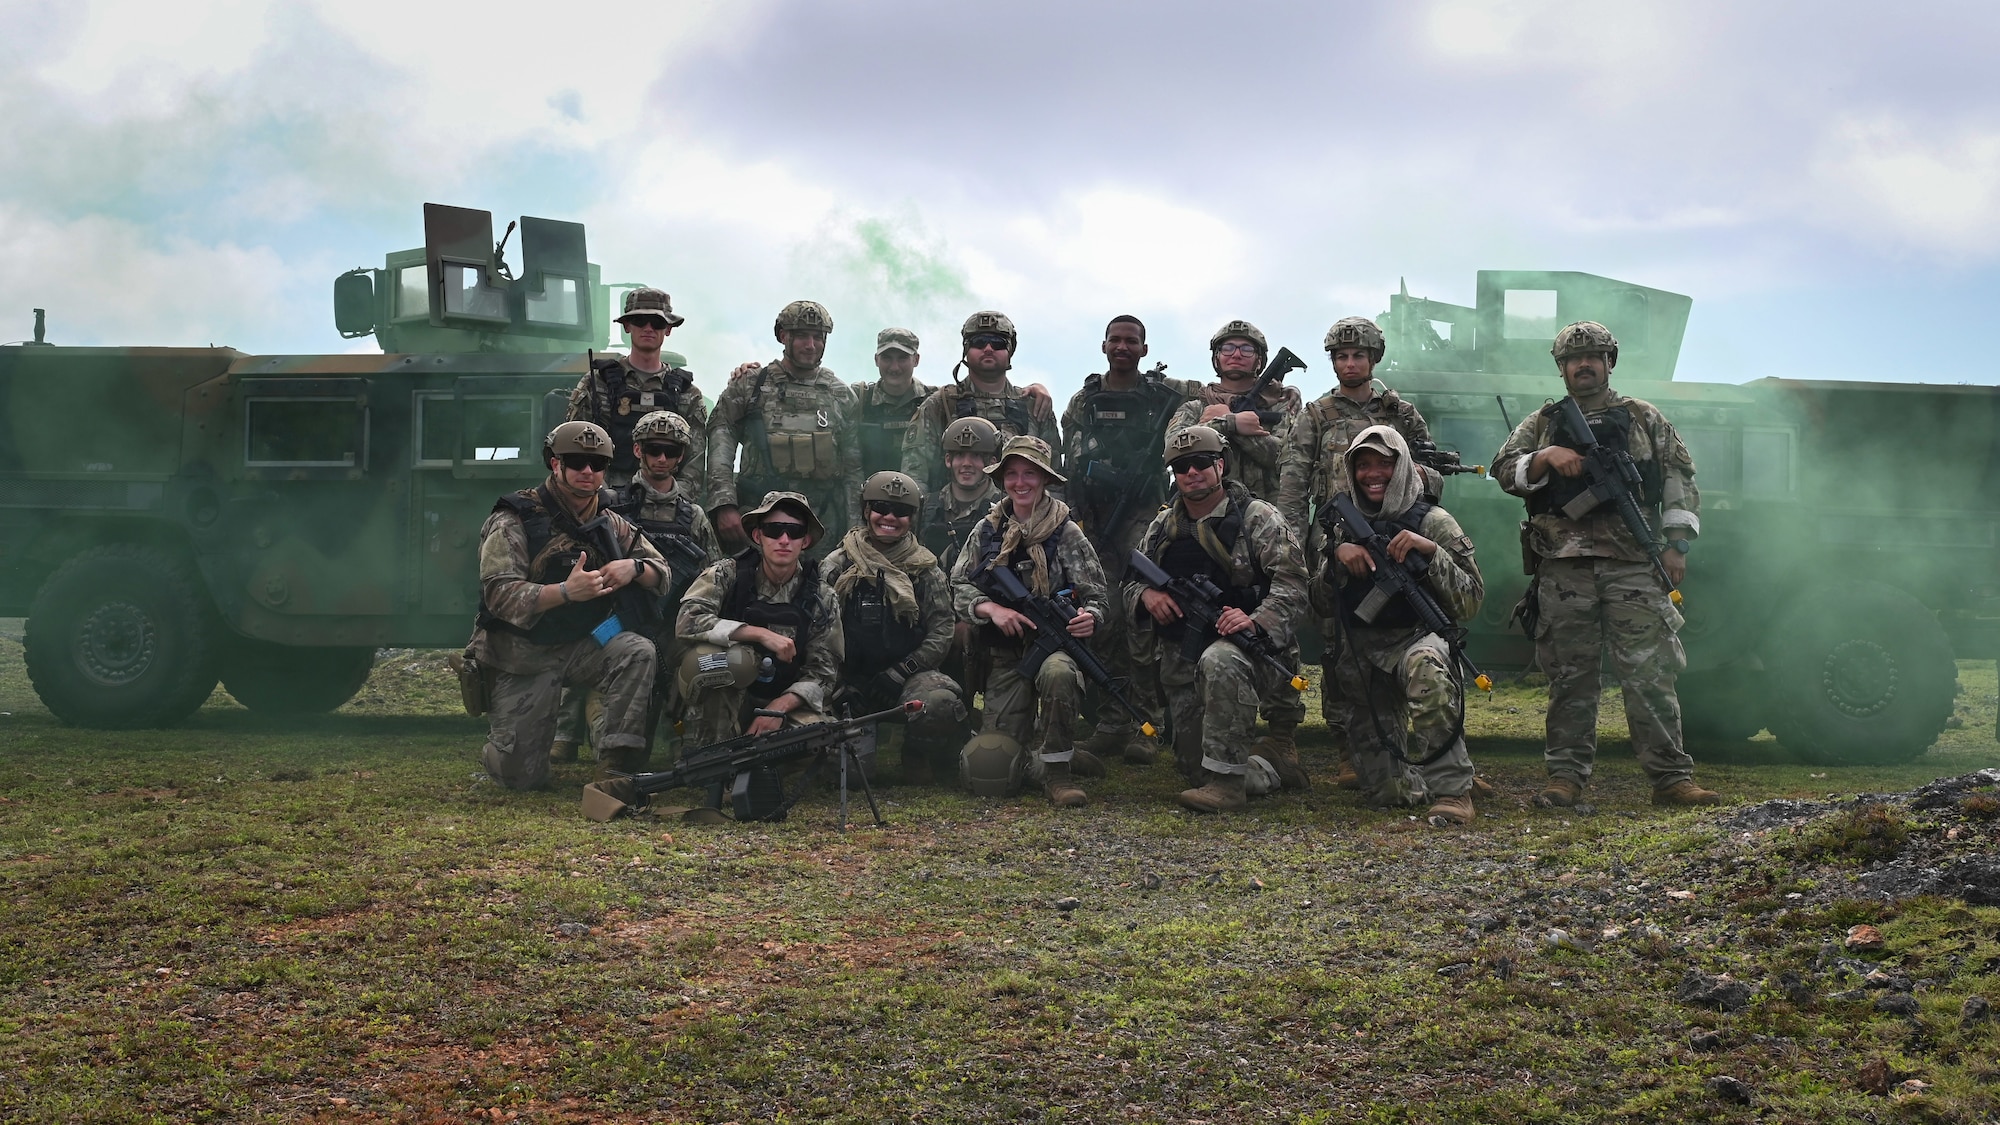 U.S. Air Force Airmen with the 736th Security Forces Squadron pose for a group photo after completing a combat training course at Andersen Air Force Base, Guam, May 3, 2022.